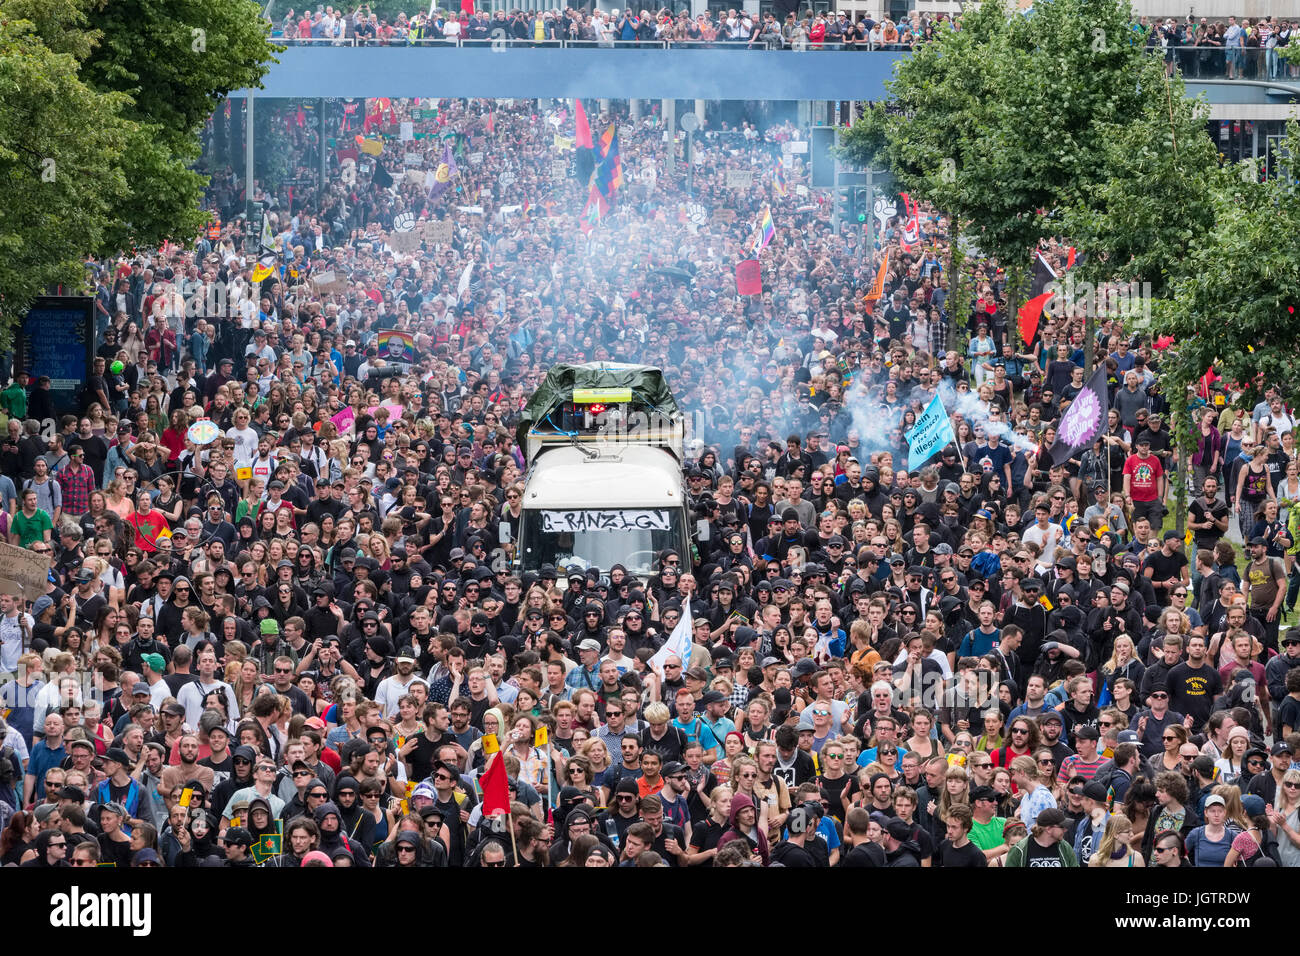 8th July, 2017. Hamburg, Germany. large demonstration march through central Hamburg protesting against G20 Summit taking place in city. Stock Photo